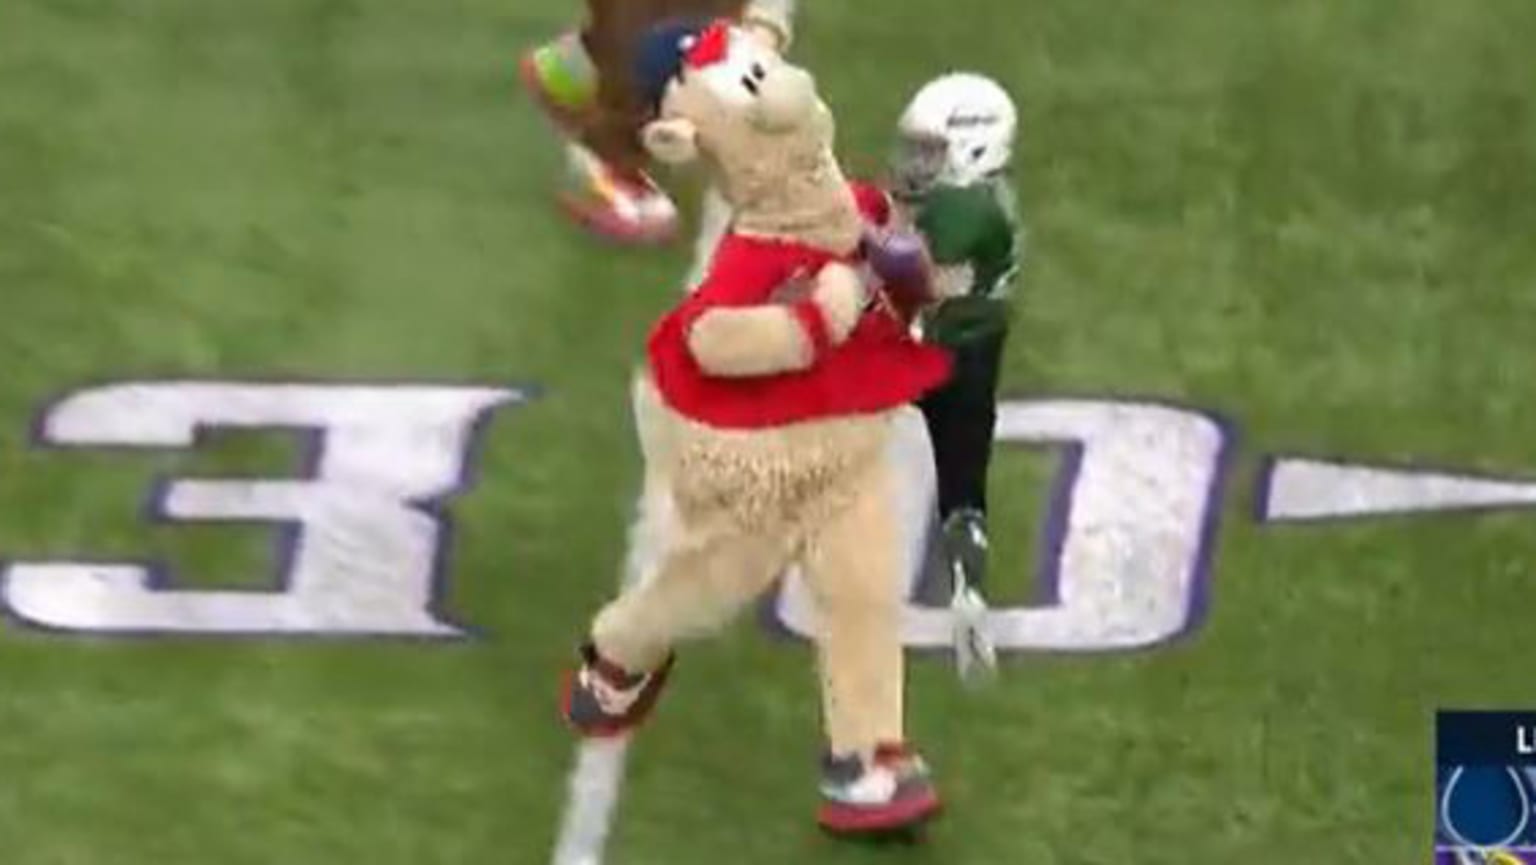 Braves mascot Blooper stiff-arms a kid during a football game